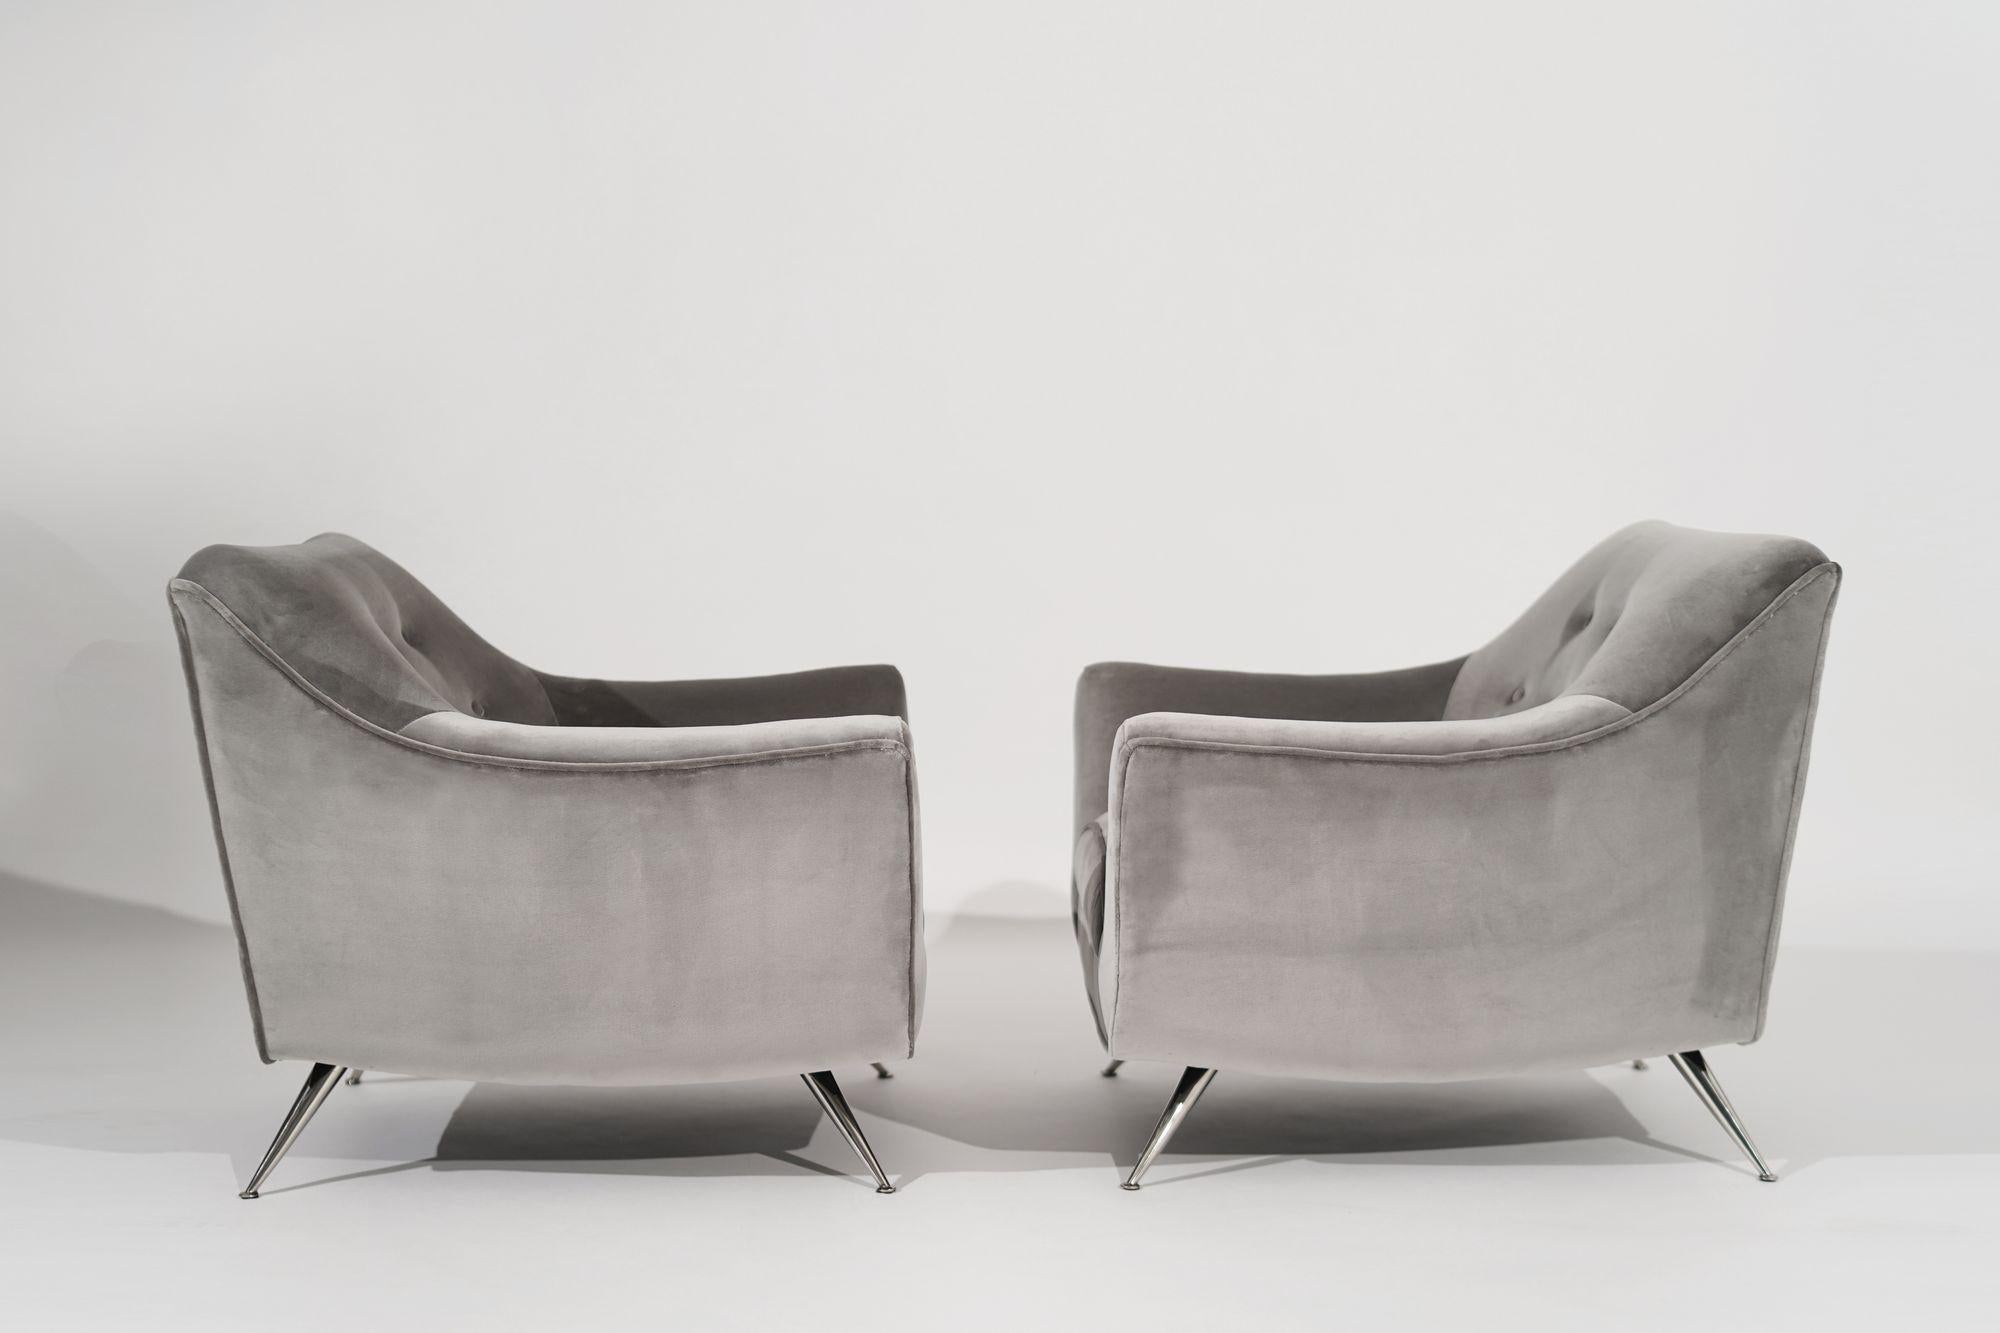 20th Century Set of Lounge Chairs by Henry Glass in Grey Alpaca Velvet, C. 1950s For Sale